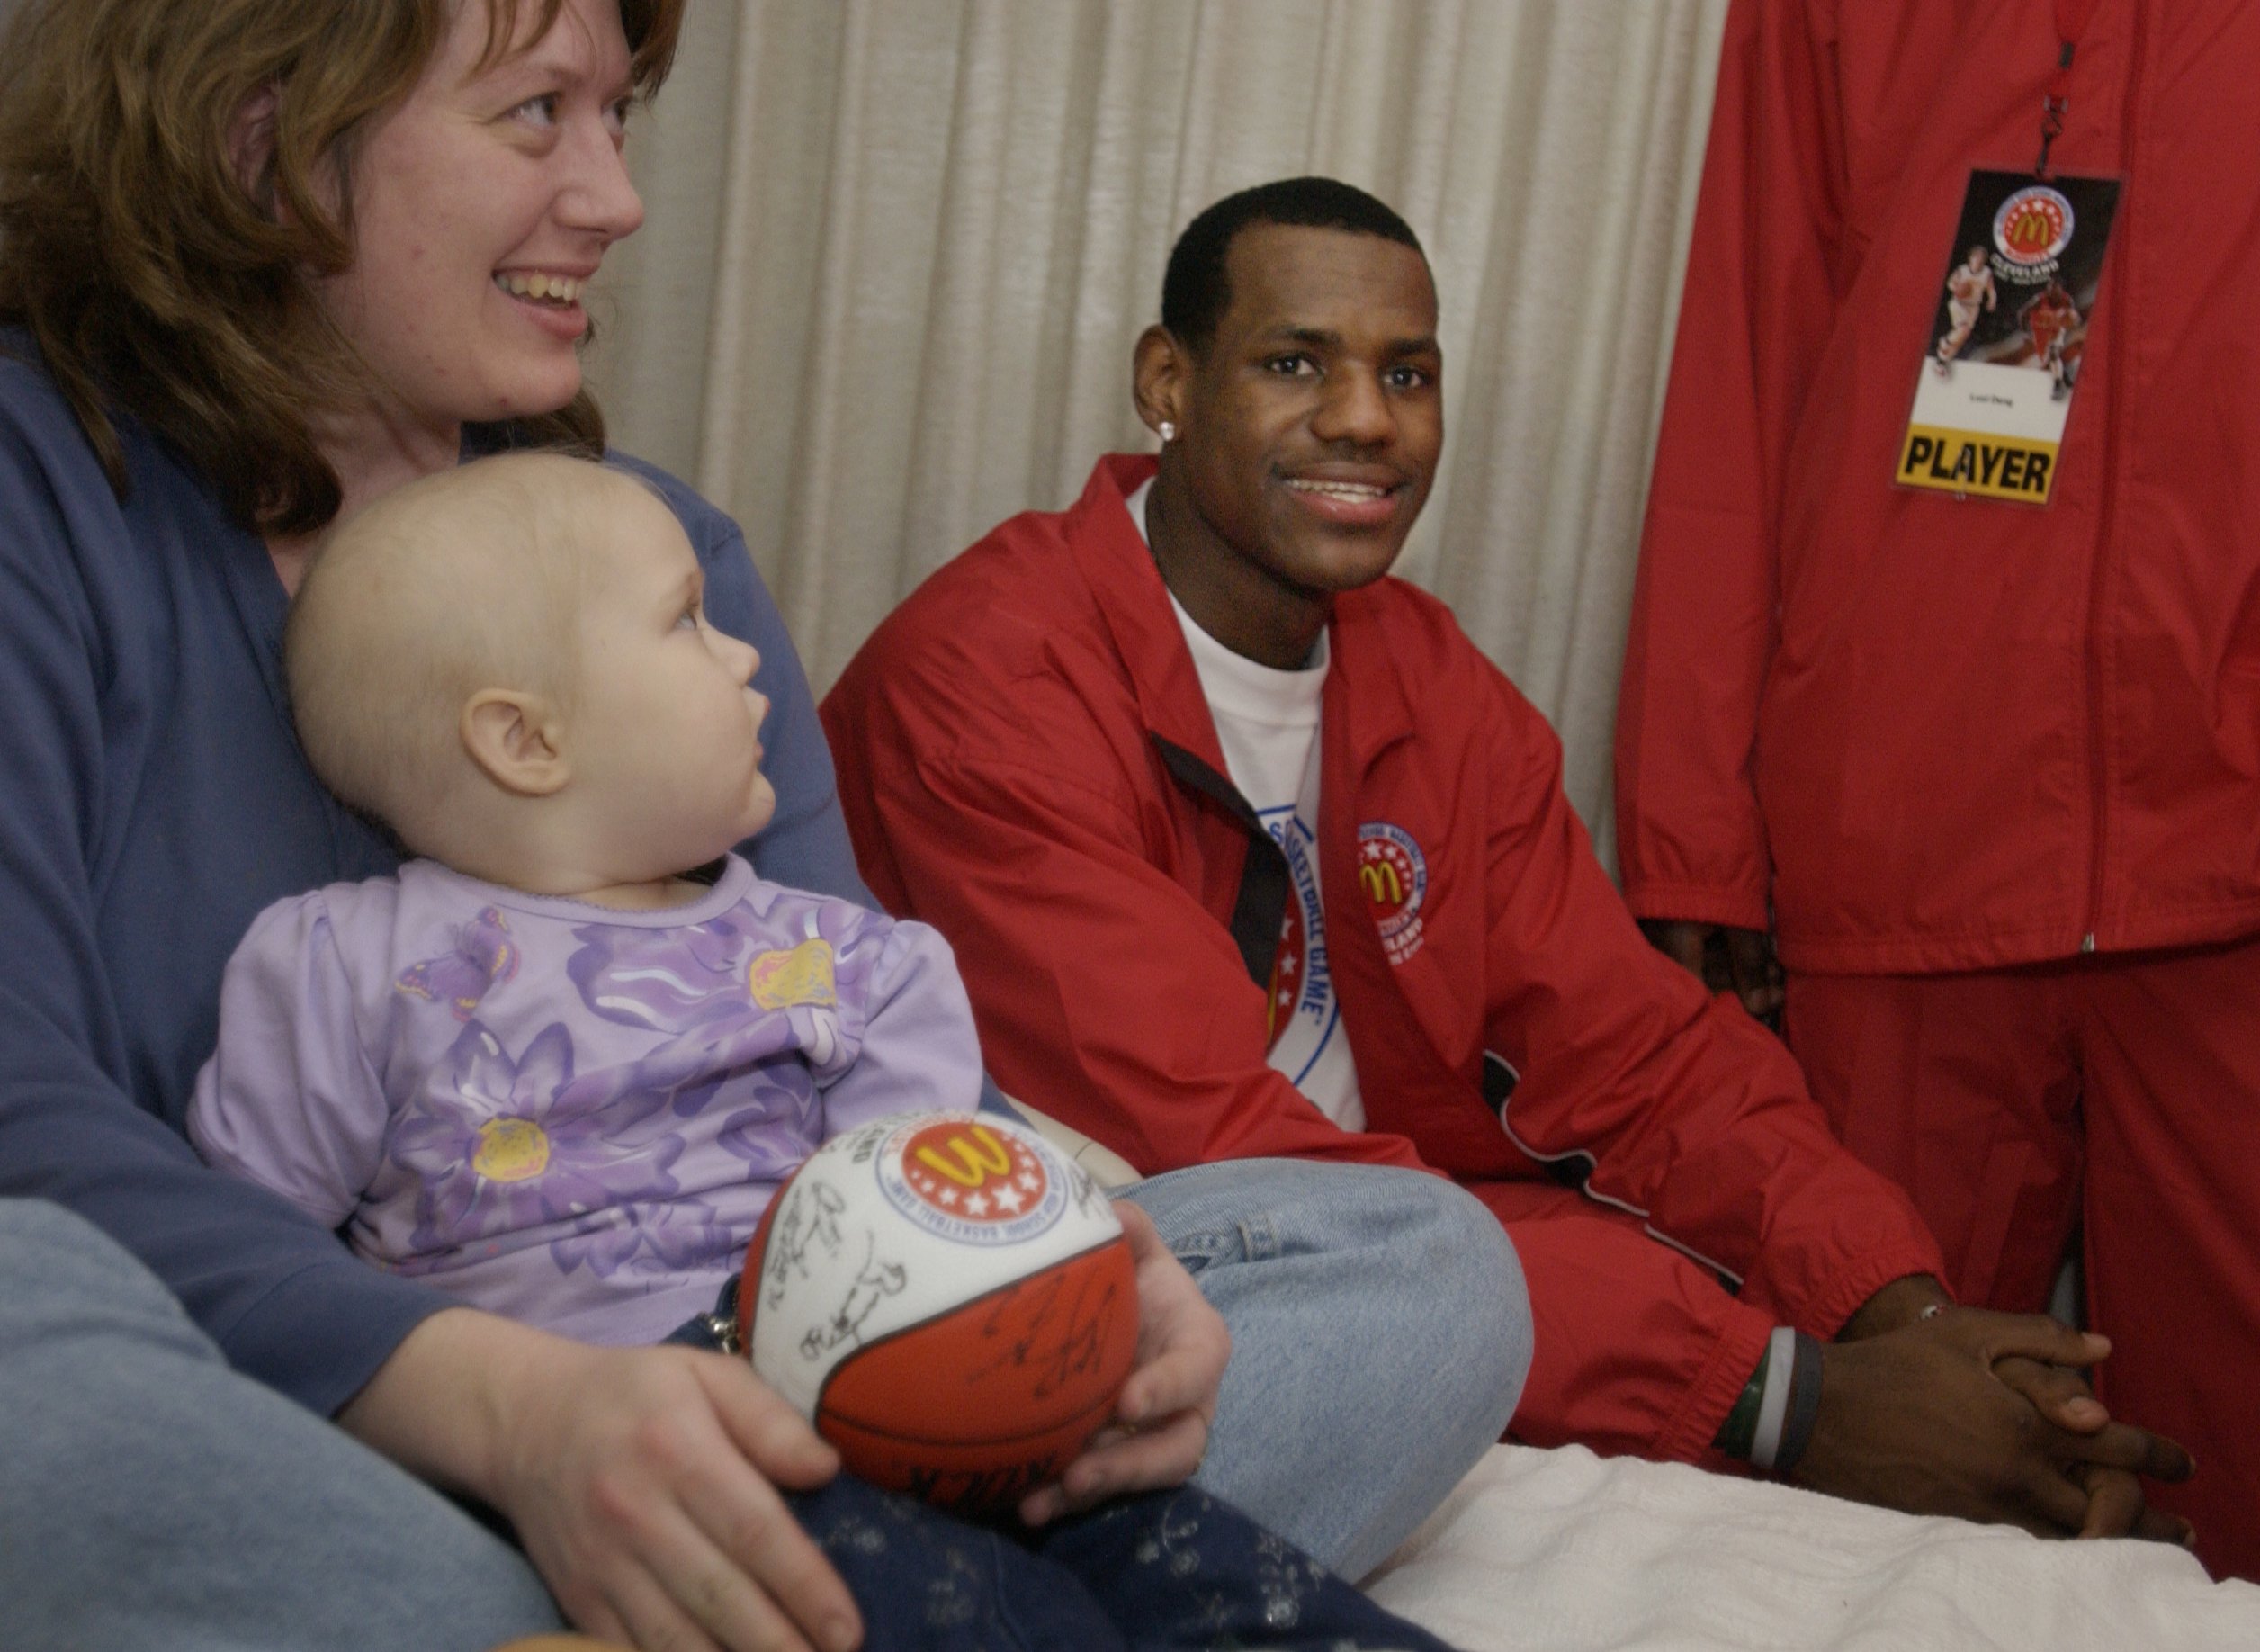 26-month-old Jesse Hyatt of Wooster and her mom, Joyce, got a surprise visit from a group of players that included local standout LeBron James, seated,  as groups of players toured Akron Children's Hospital Sunday afternoon.   While LeBron and Joyce enjoy a light moment, Jesse intently studies the tall players that invaded her room.  SUNDAY MARCH 23,2003 (BILL KENNEDY/PLAIN DEALER) 